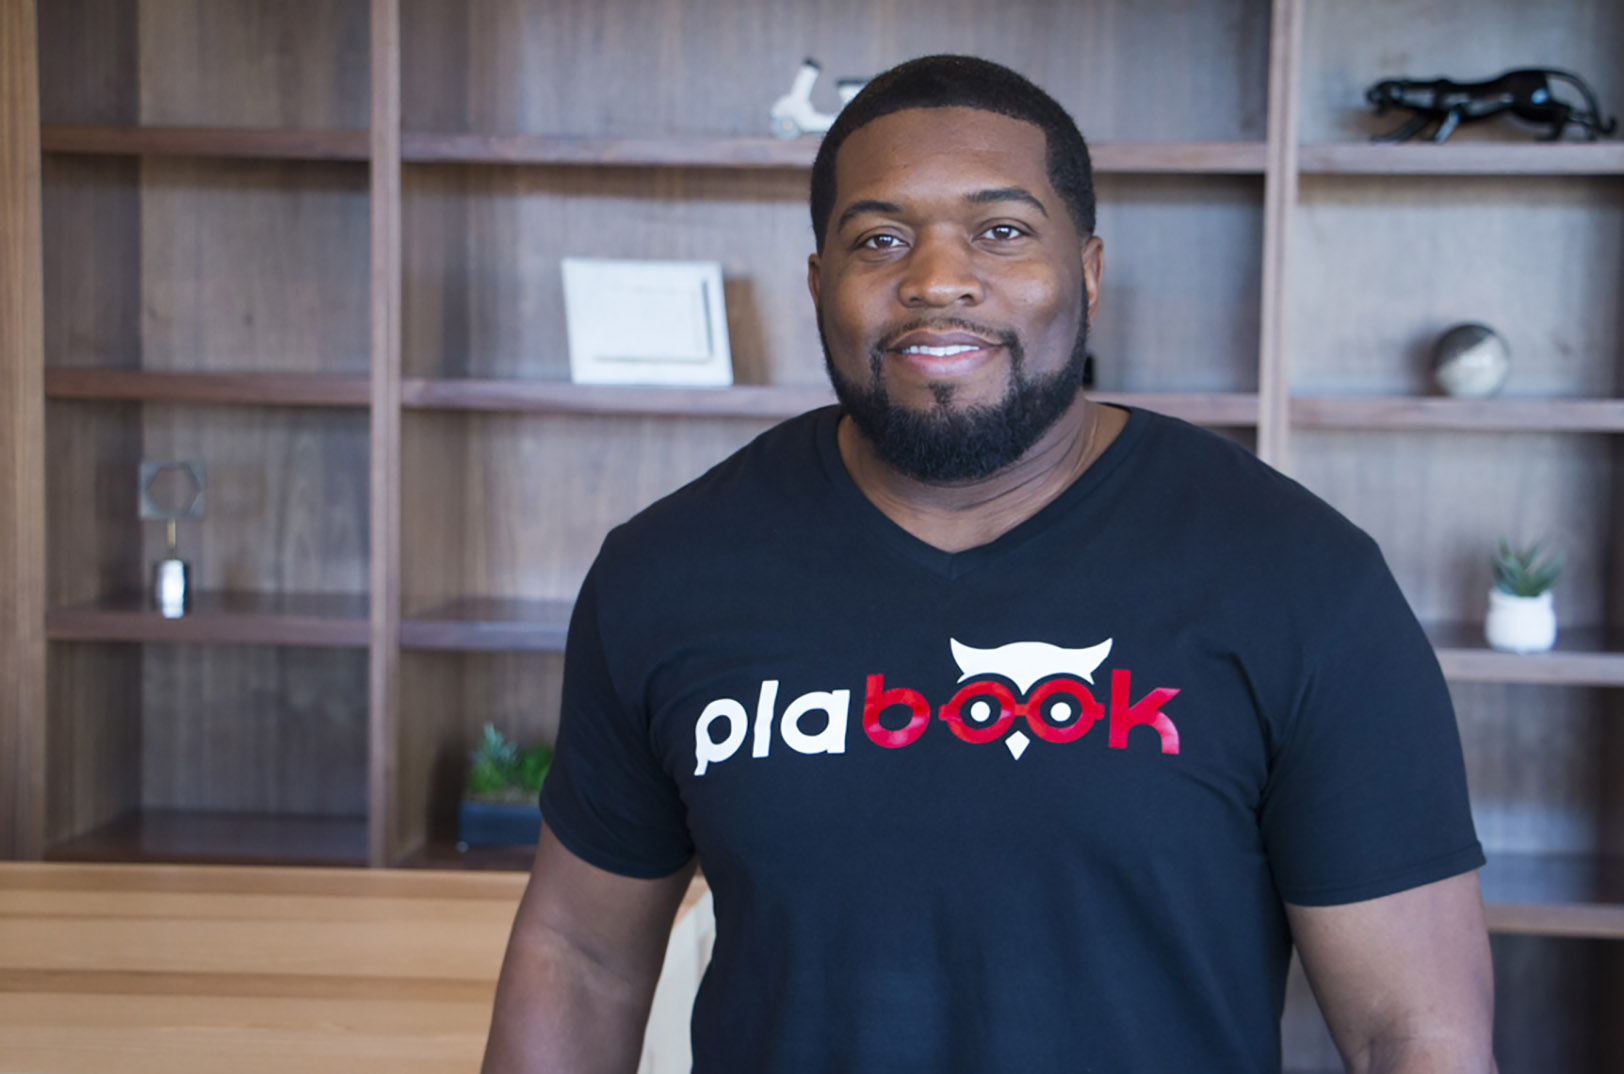 KC’s PlaBook, Erkios selected for coveted $50K Arch Grants, boosting St. Louis startup scene